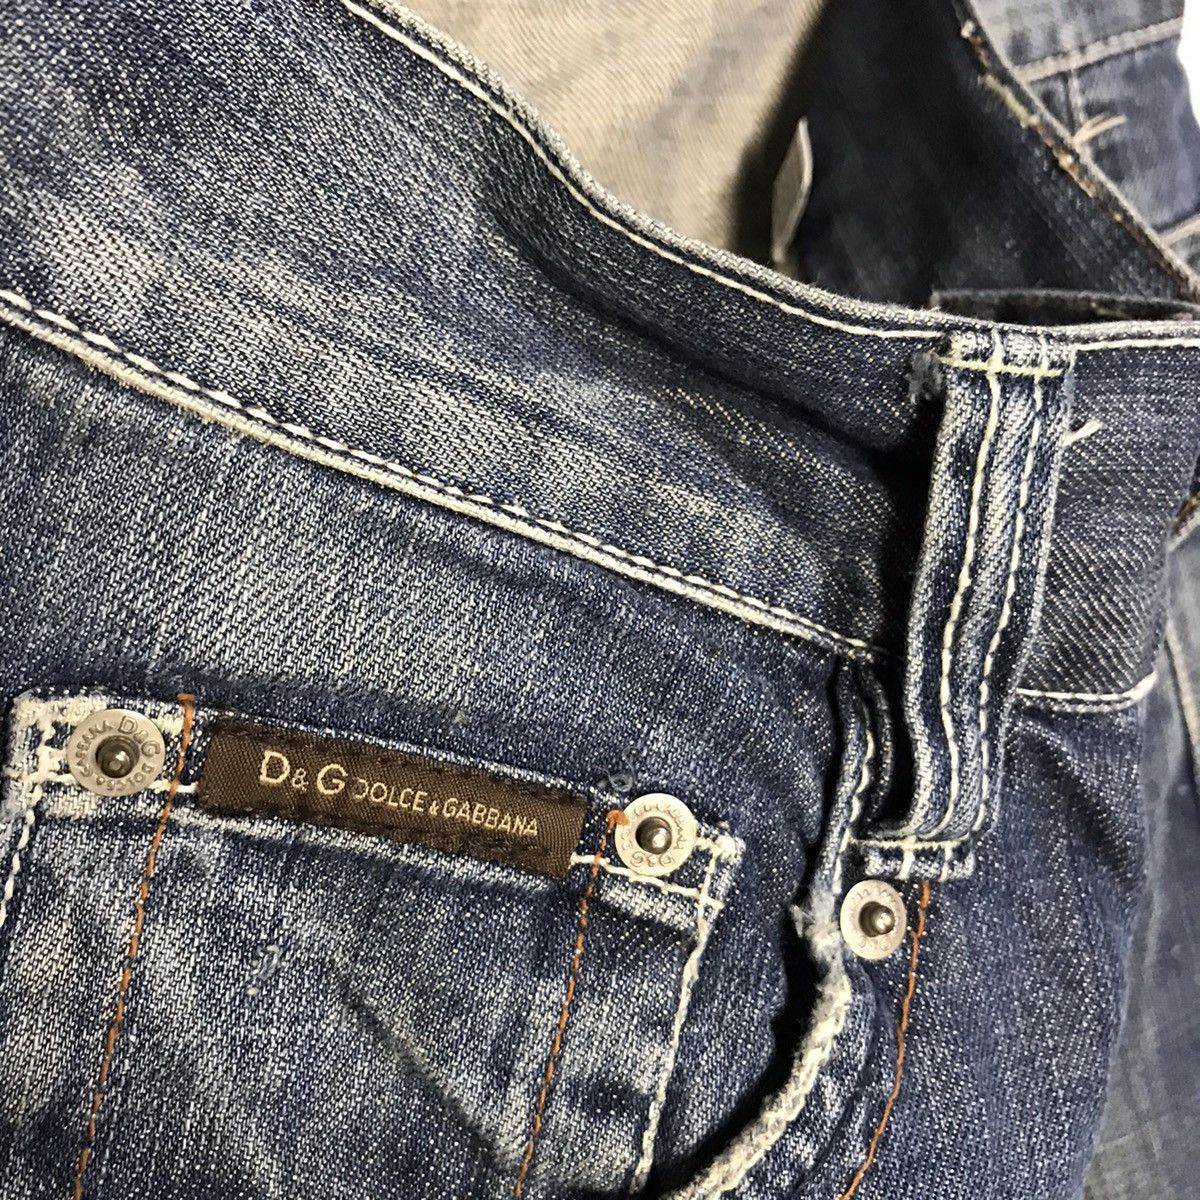 D&G denim pants made in italy - 9